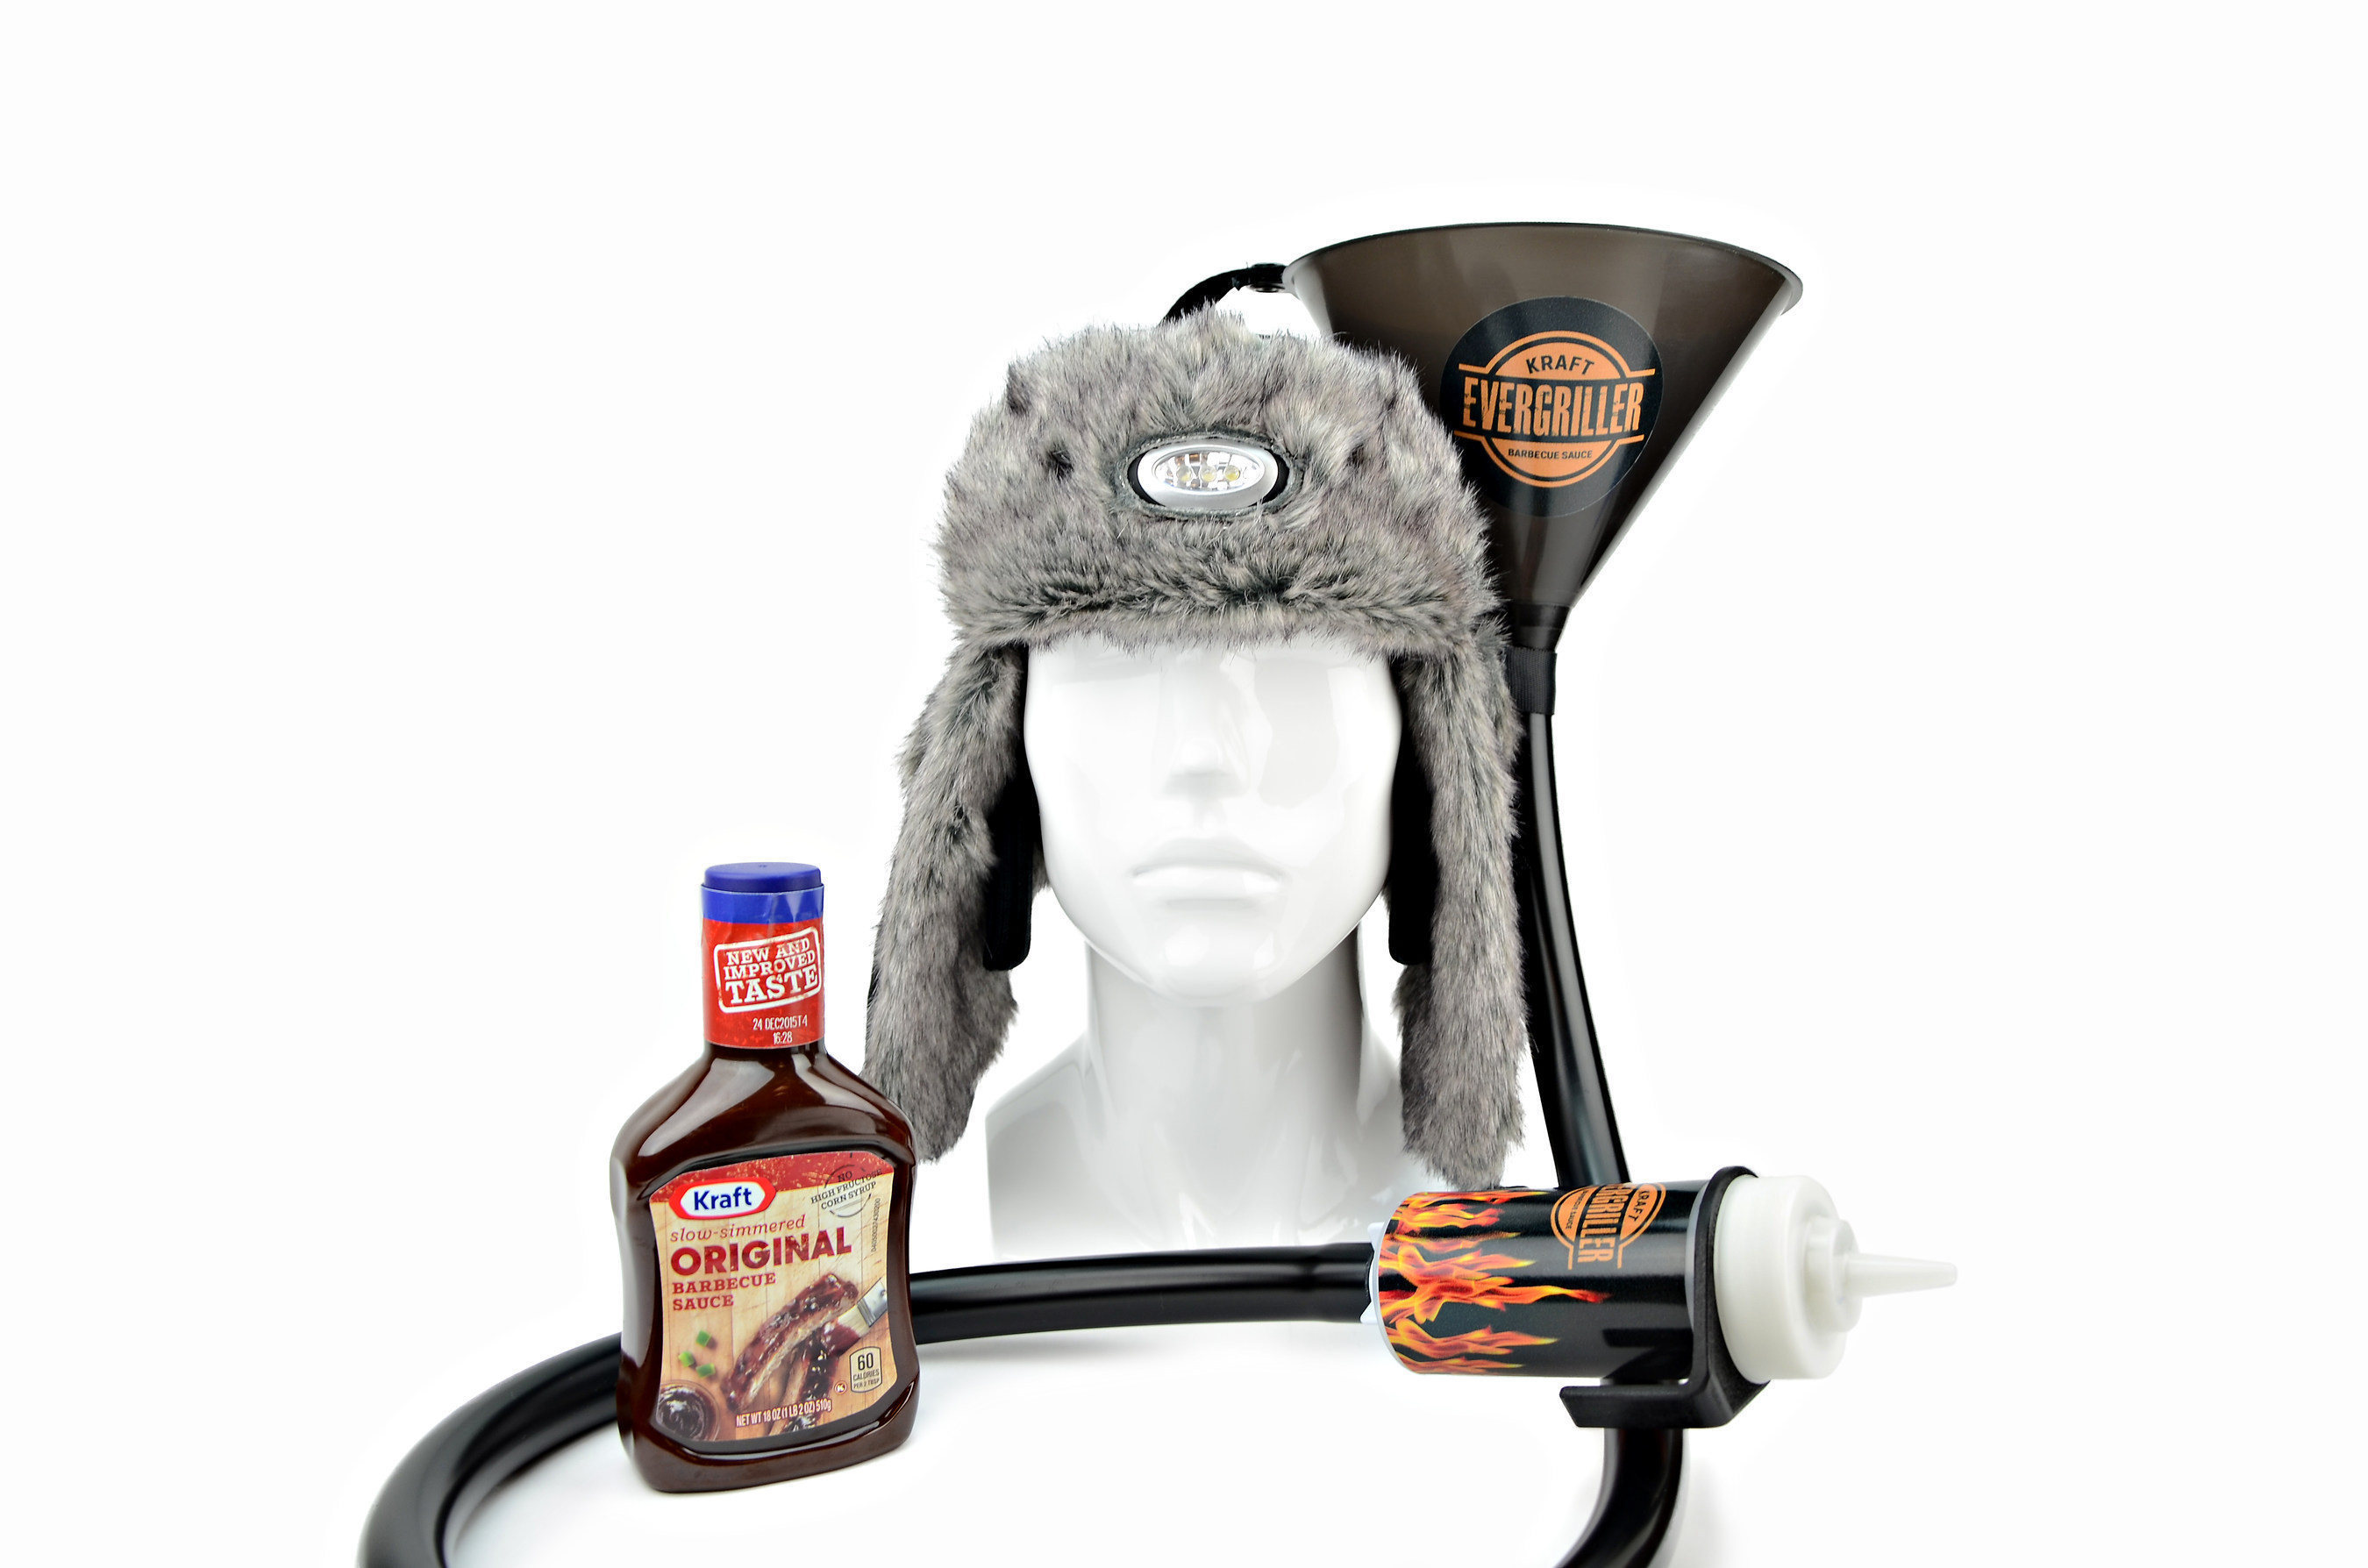 Kraft Barbecue Sauce's Evergriller Hot Head Hat is an all-purpose, weather-proof hat designed to keep grillers warm while acting as a holder for the most important grill necessities.